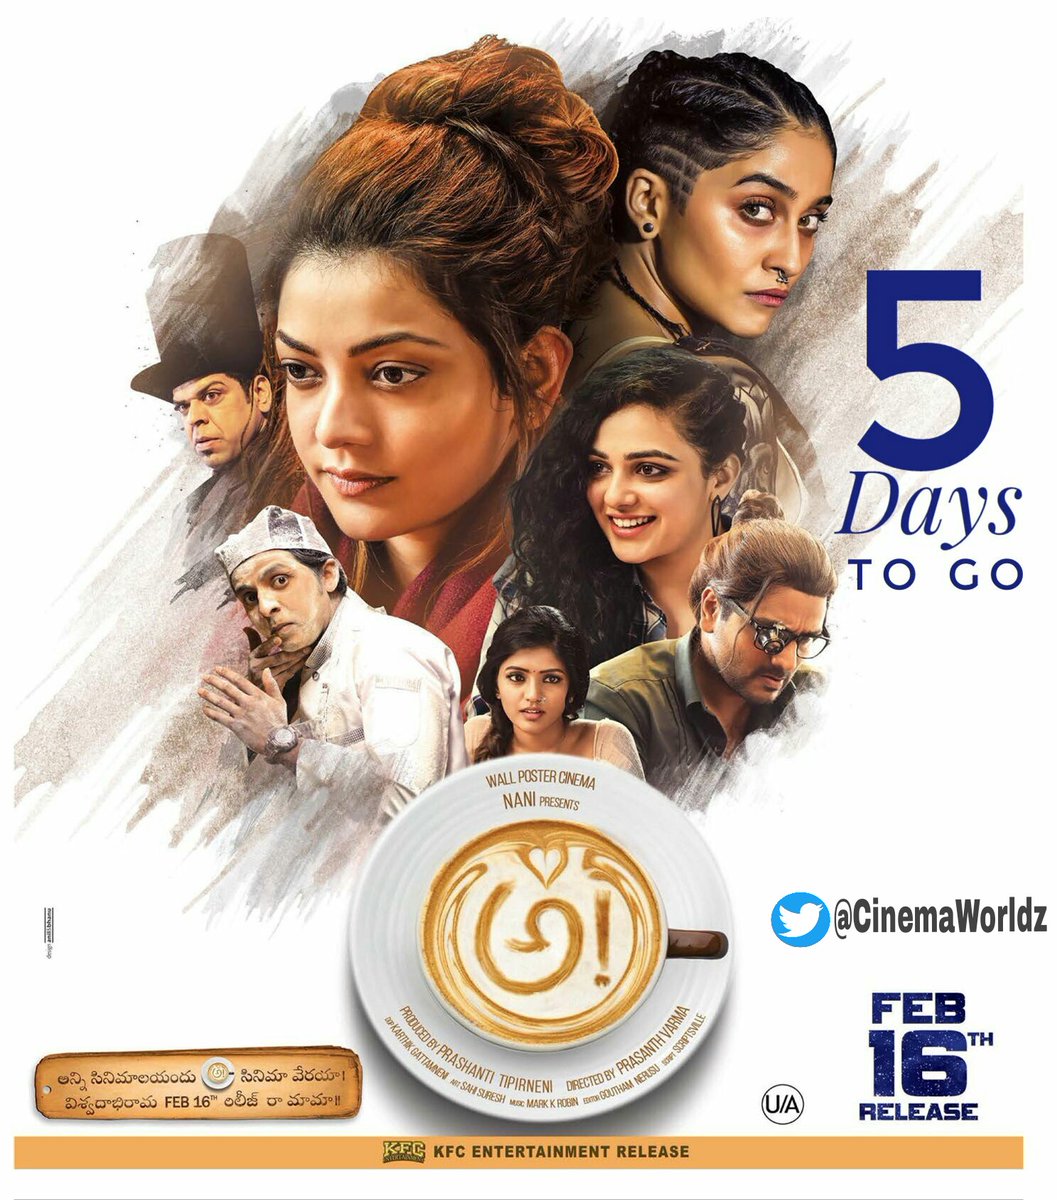 Meet @MsKajalAggarwal As#Kali next Friday, in the theatres near you!! 

youtube.com/watch?v=xOEscQ…

How many are Waiting for FDFS ? 😉
ONLY 5 DAYS LEFT
pic:- @CinemaWorldz 
#AWEReleaseOnFEB16th #Awe 
#KajalAggarwal